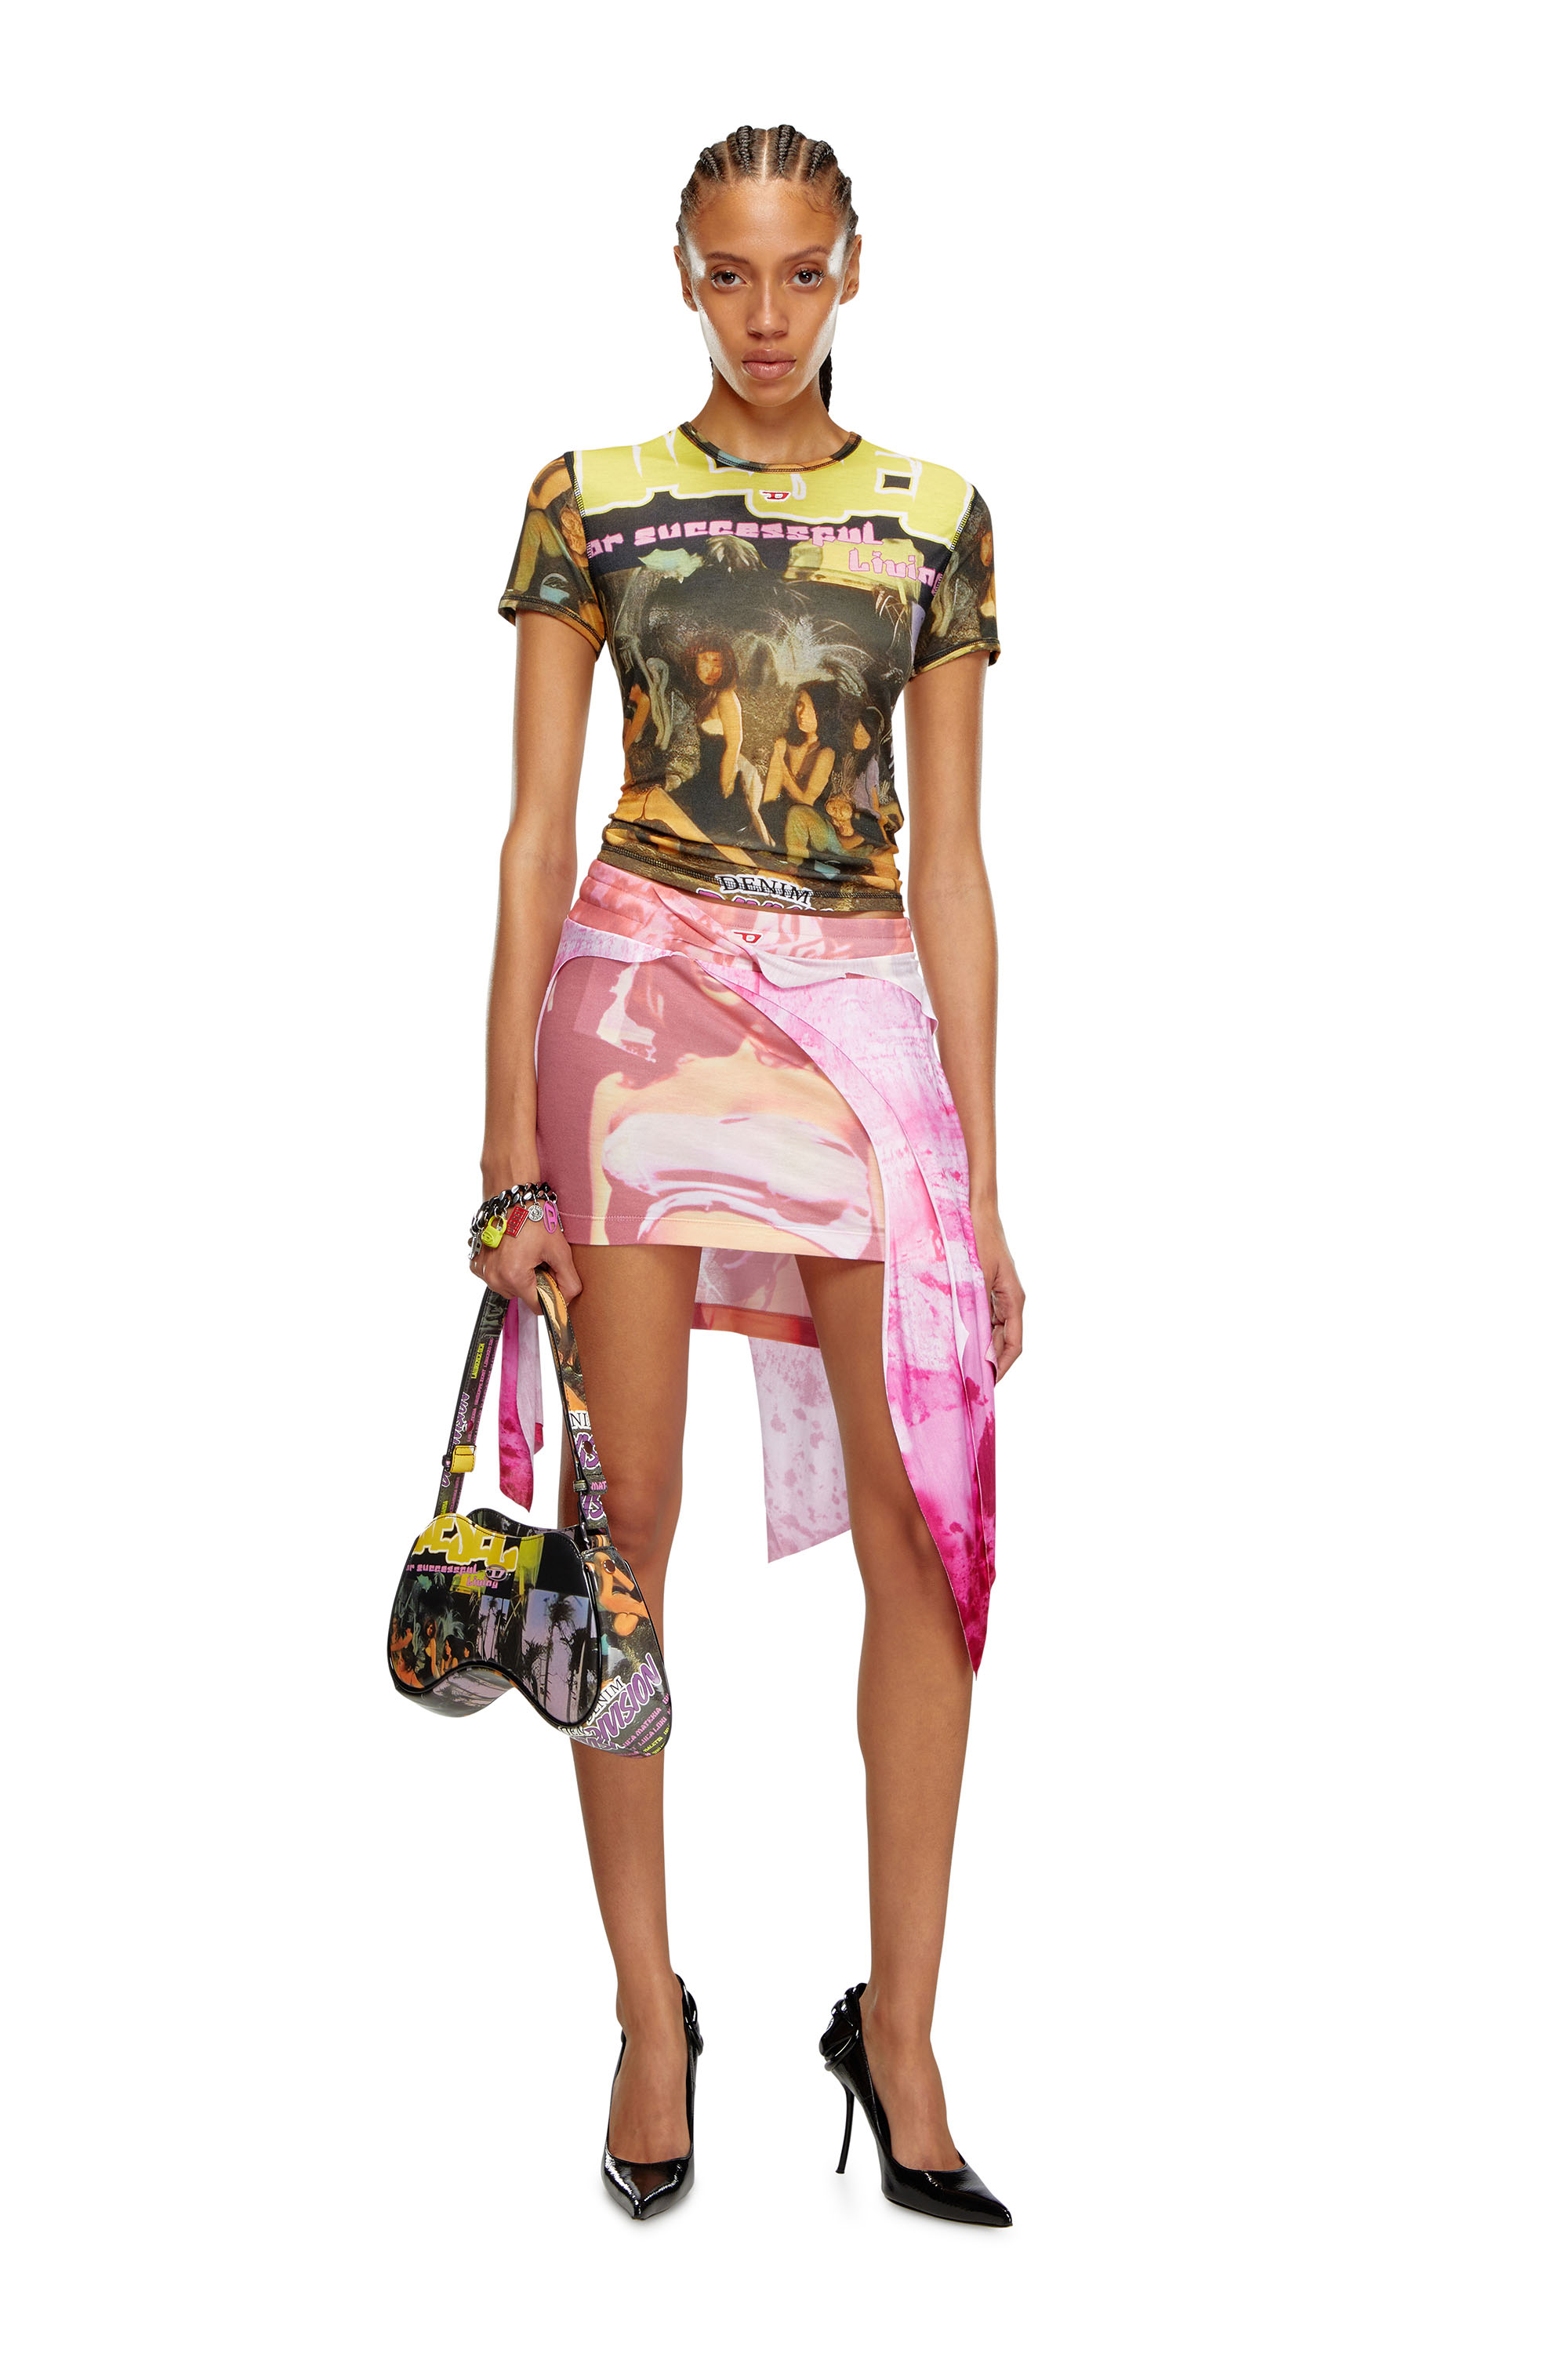 Diesel - O-MALOR-P1, Female Asymmetric mini skirt in printed jersey in ピンク - Image 1